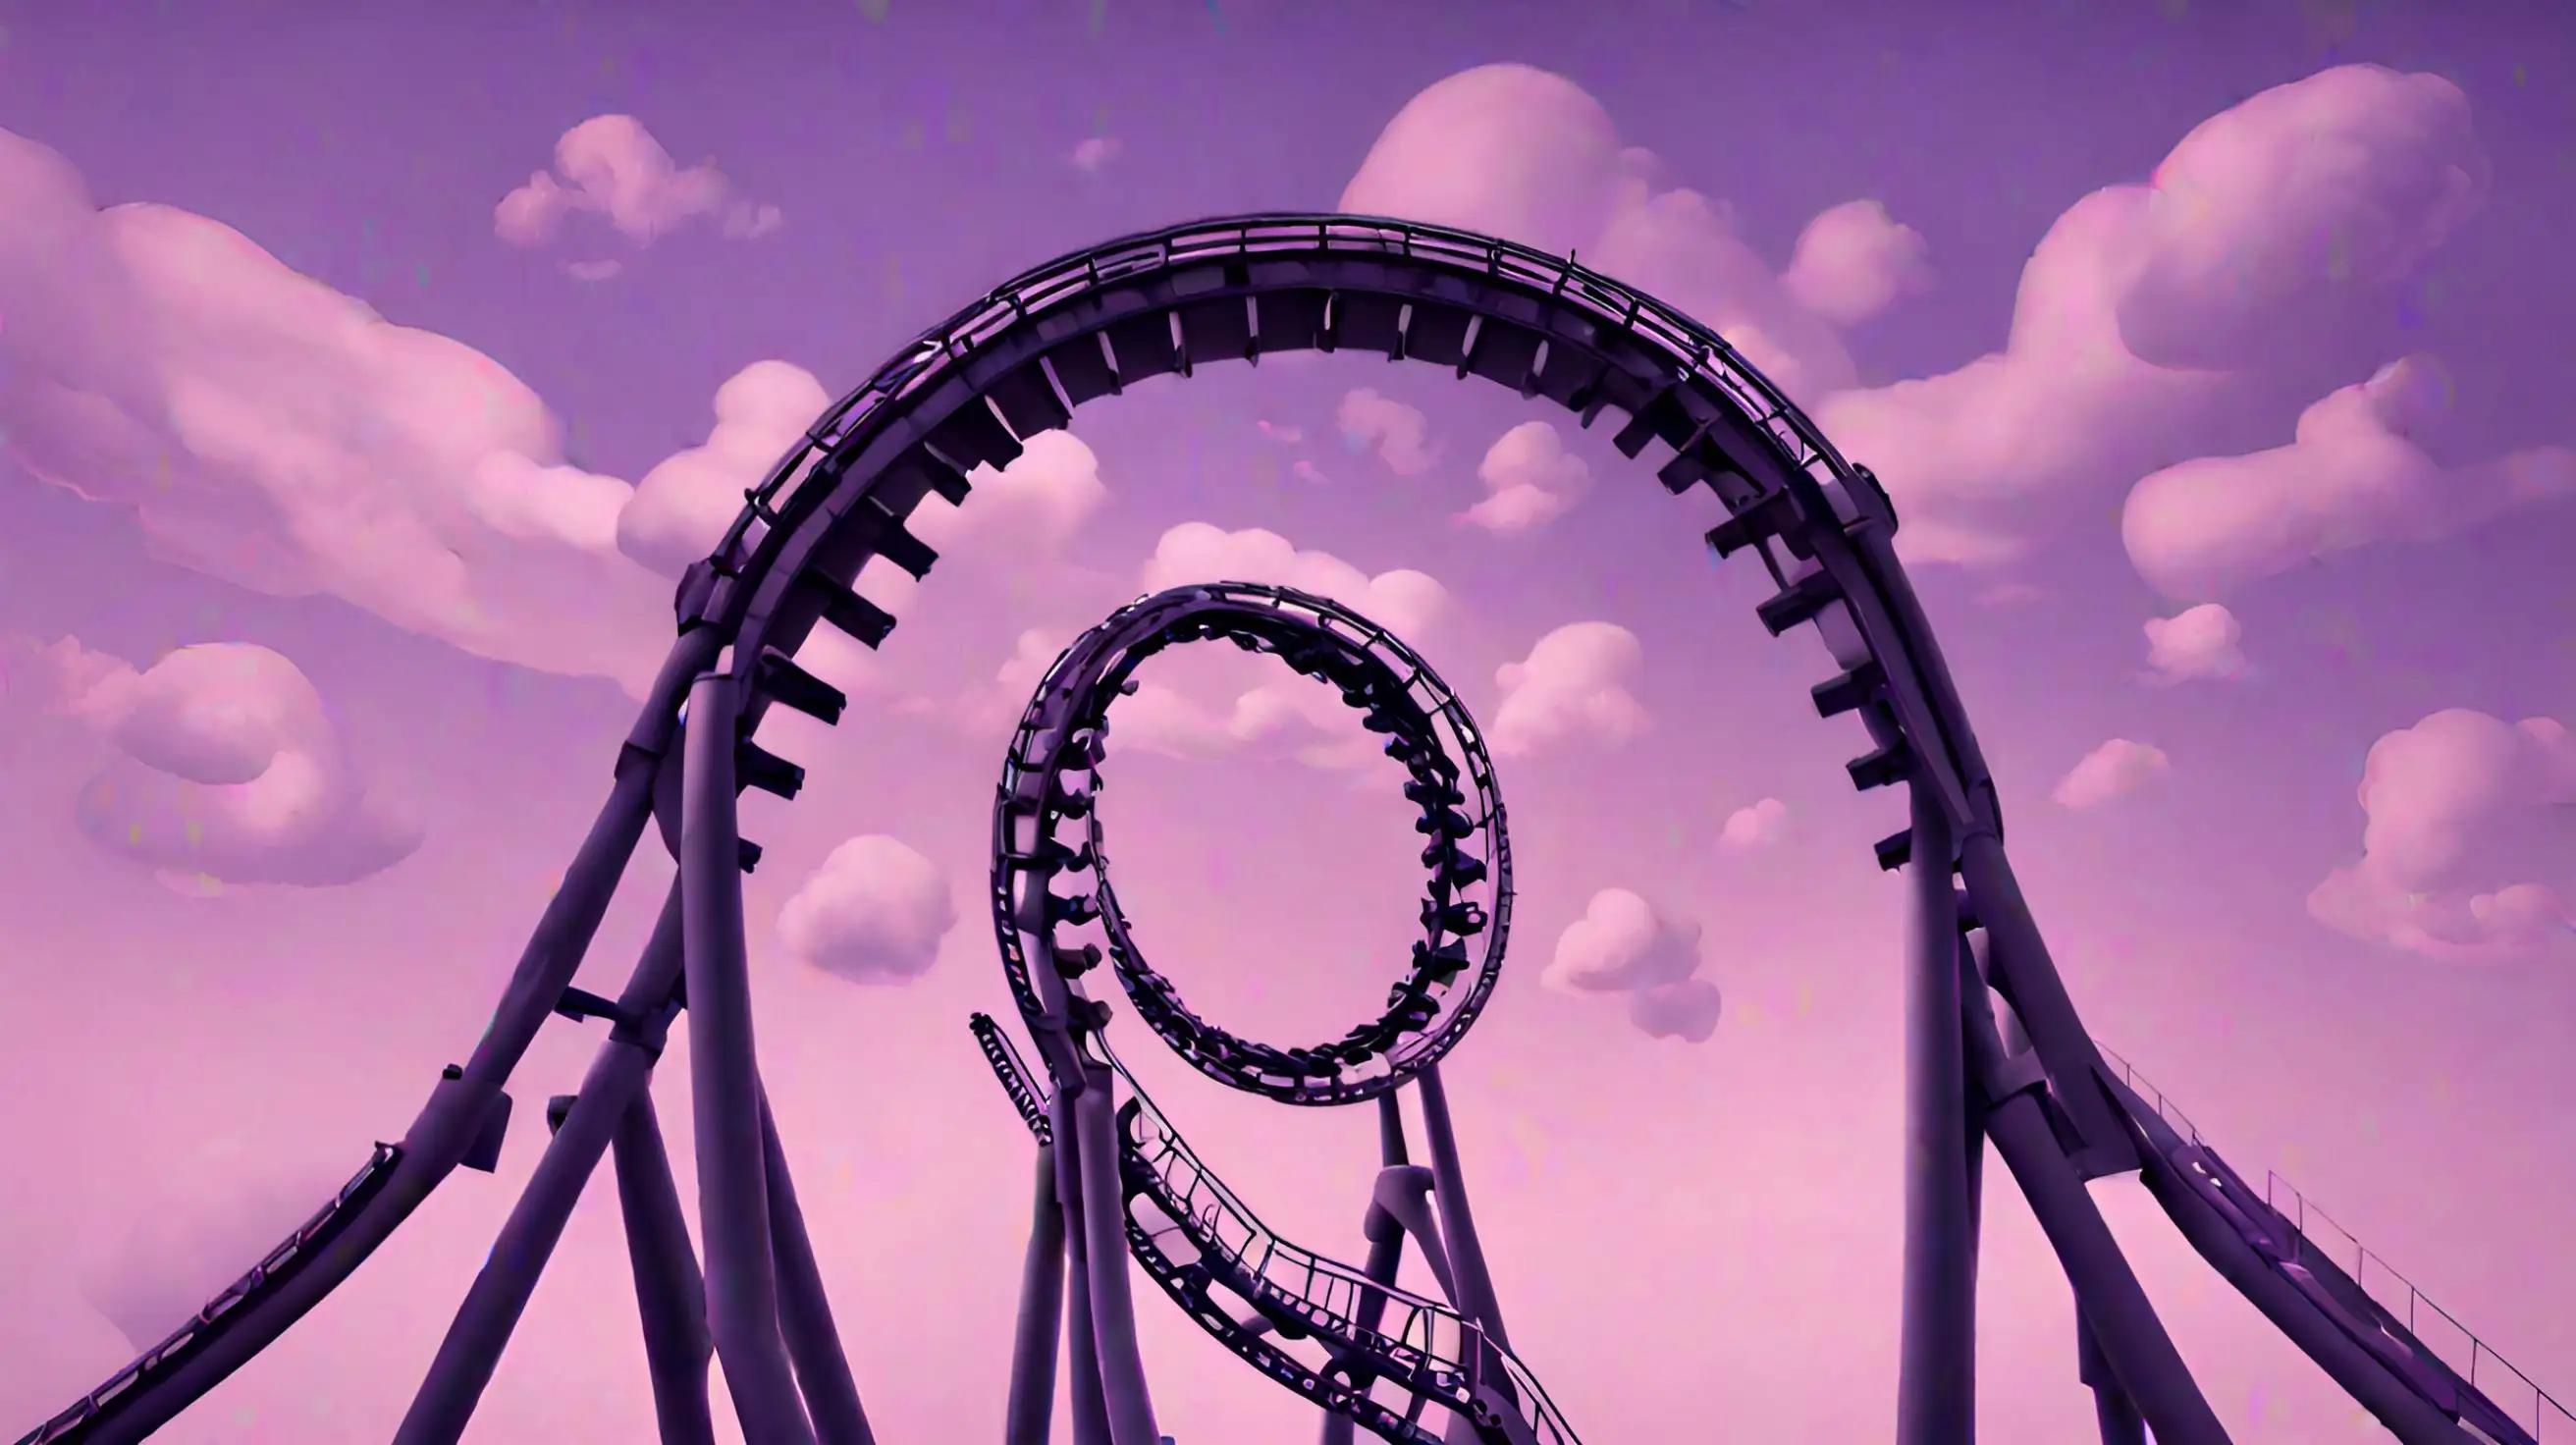 What are the Roller Coaster Dream Meanings